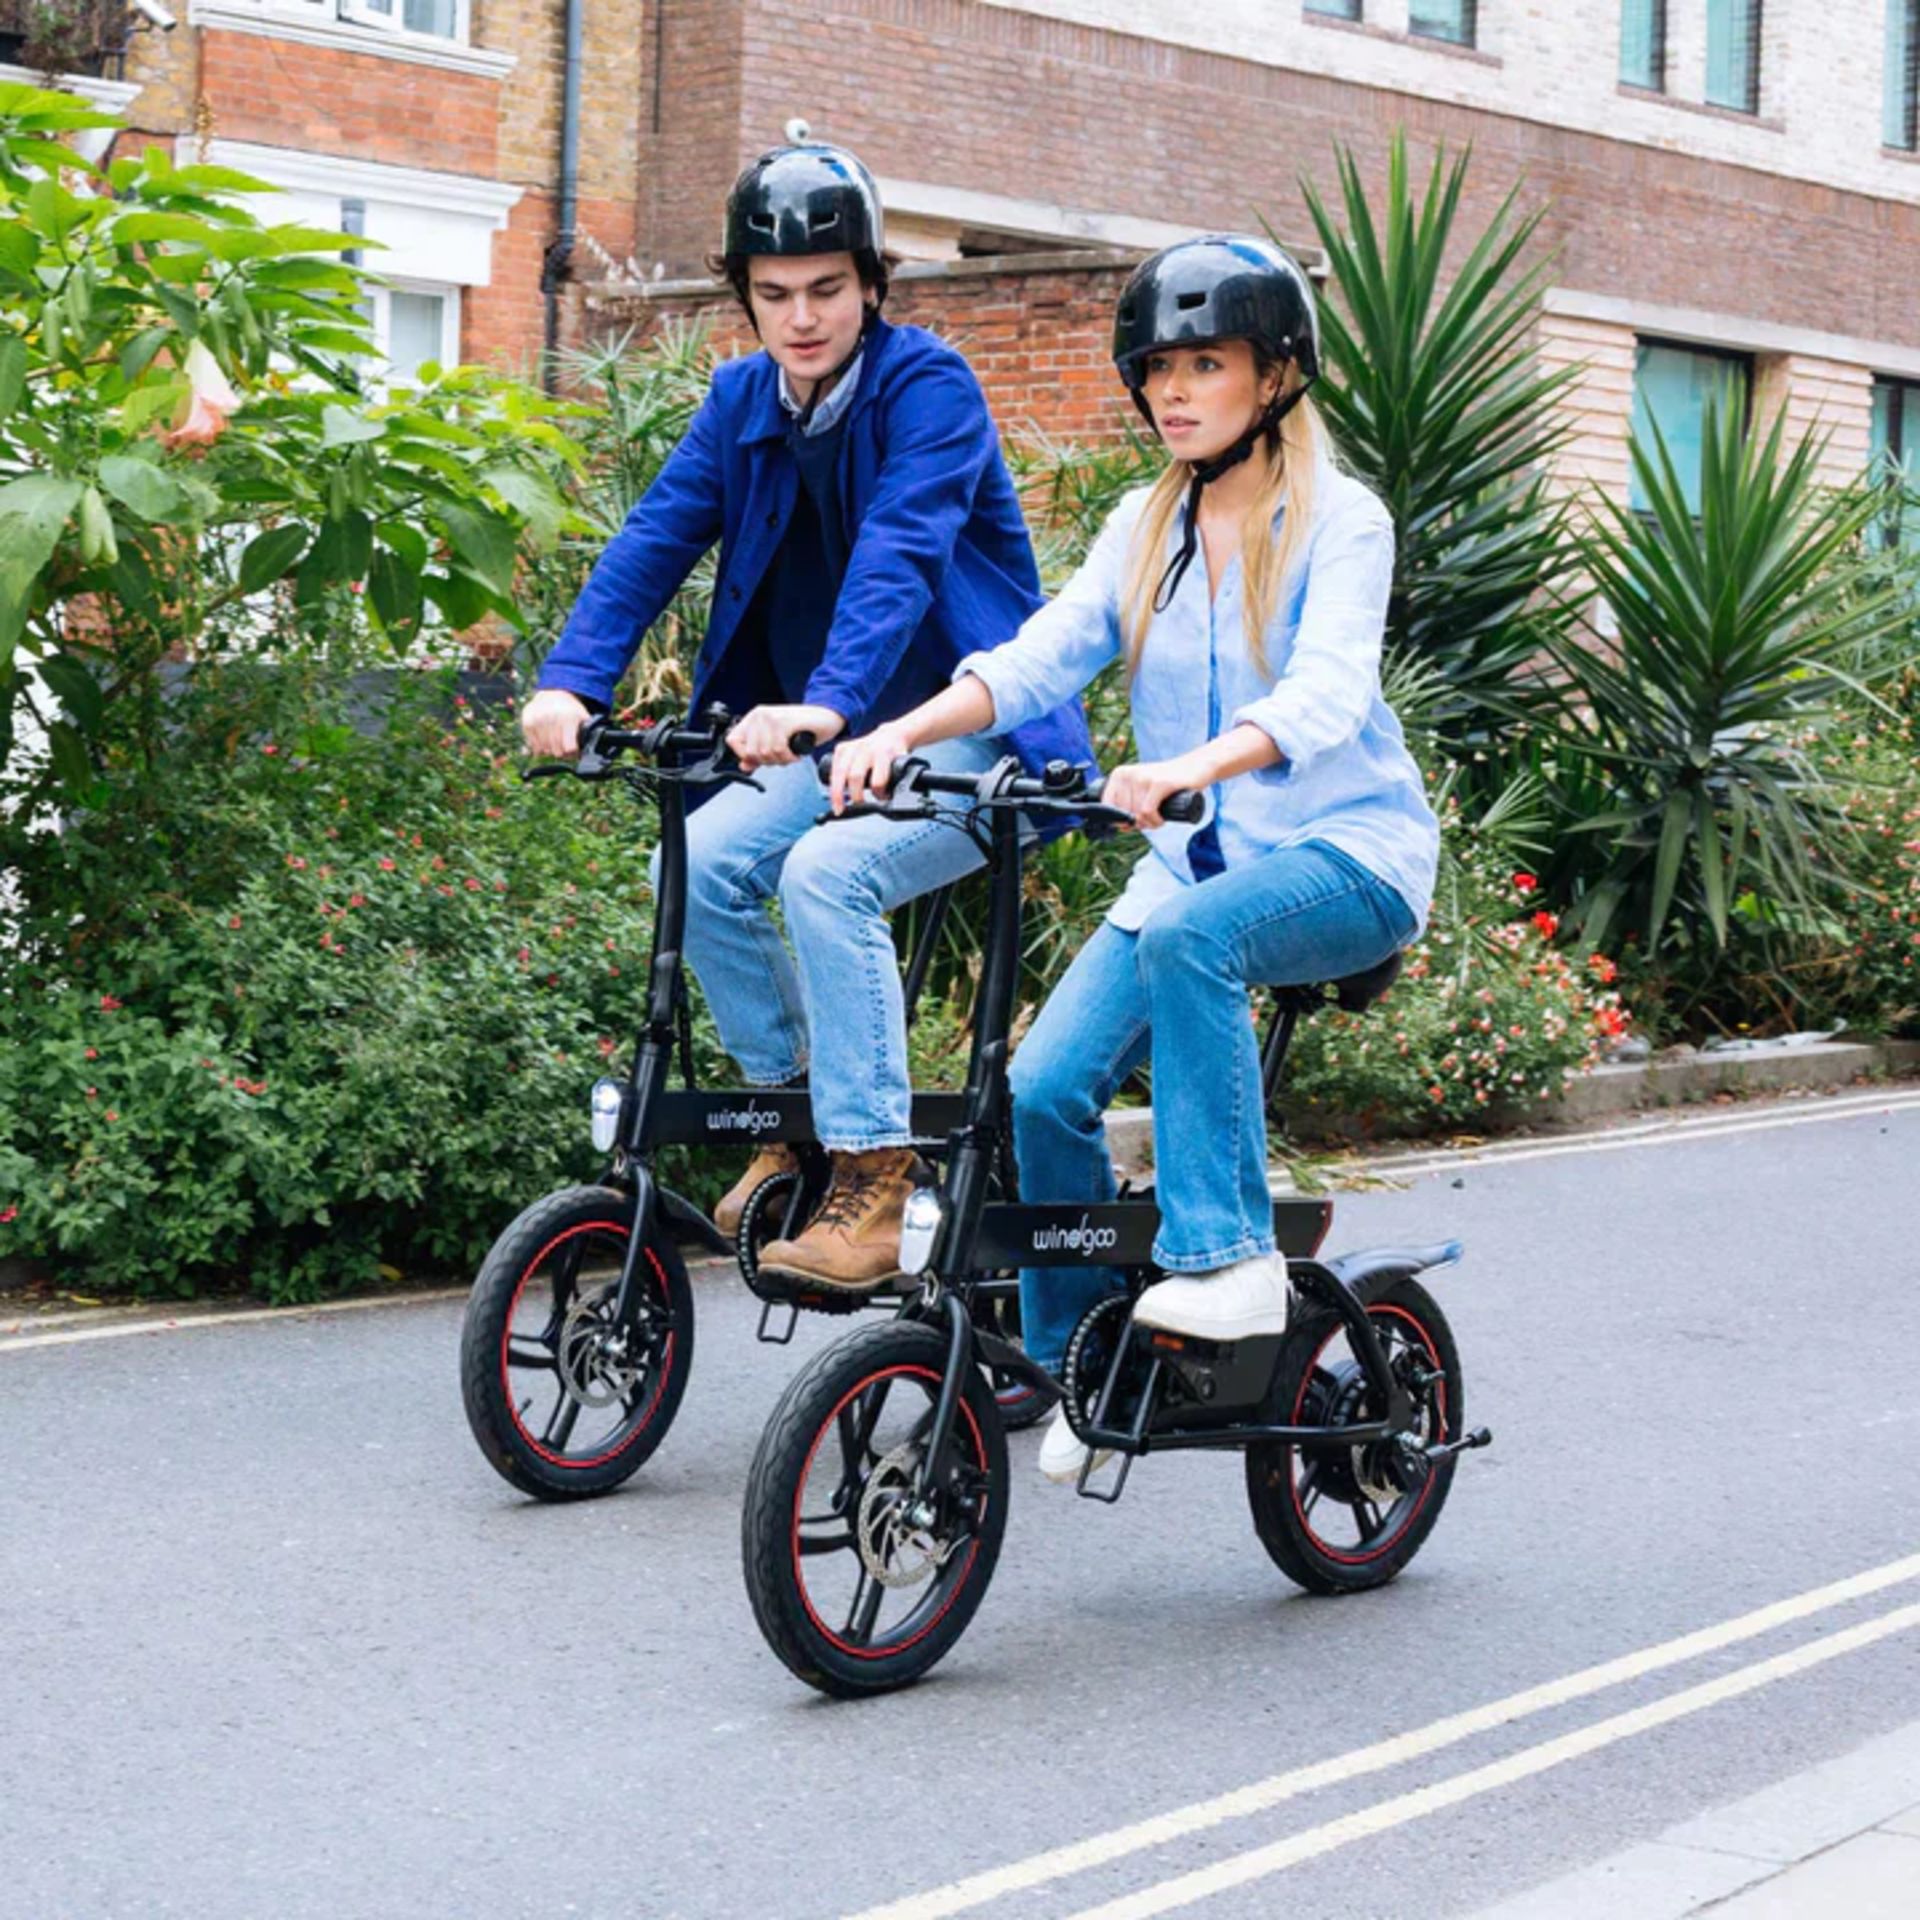 Windgoo B20 Pro Electric Bike. RRP £1,100.99. With 16-inch-wide tires and a frame of upgraded - Bild 2 aus 7